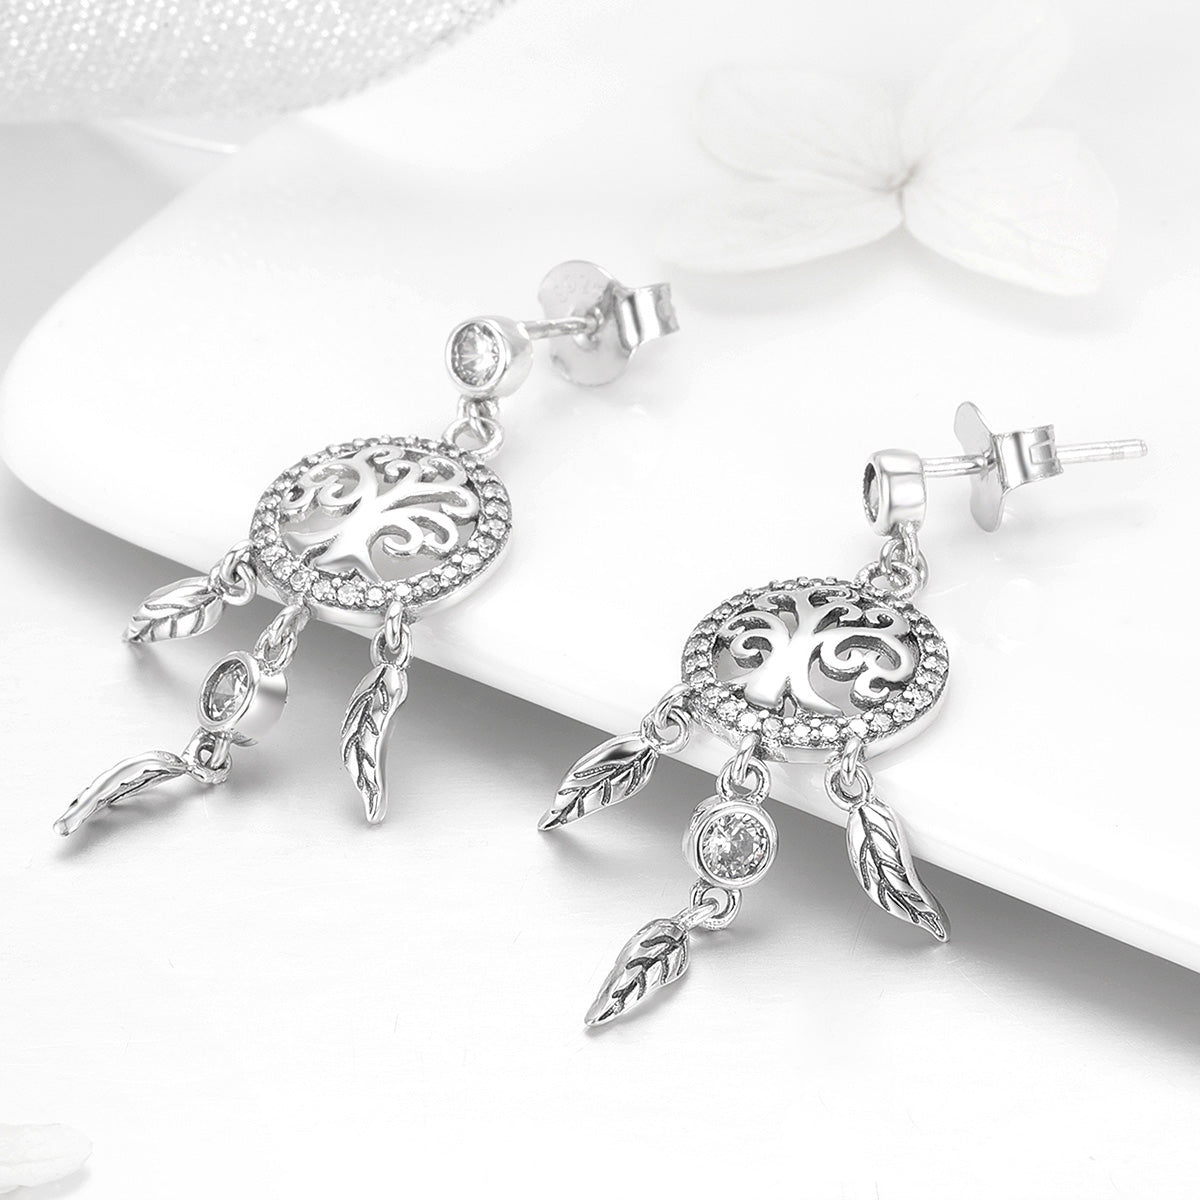 Sterling Silver Shiny Tree of Life Dream Catcher Stud Hypoallergenic Earrings